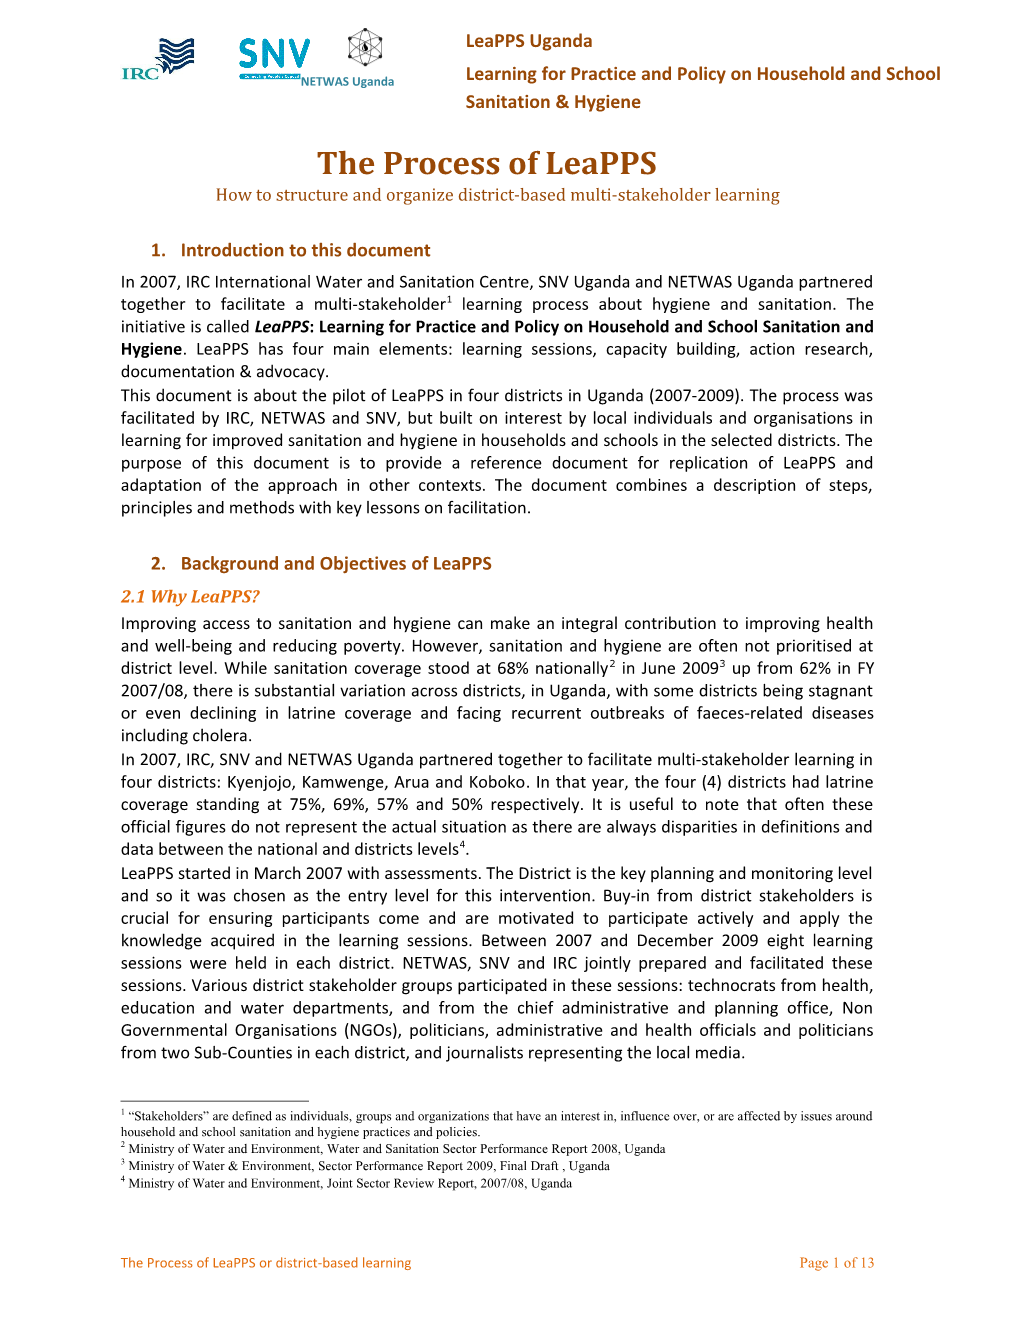 The Process of Leapps